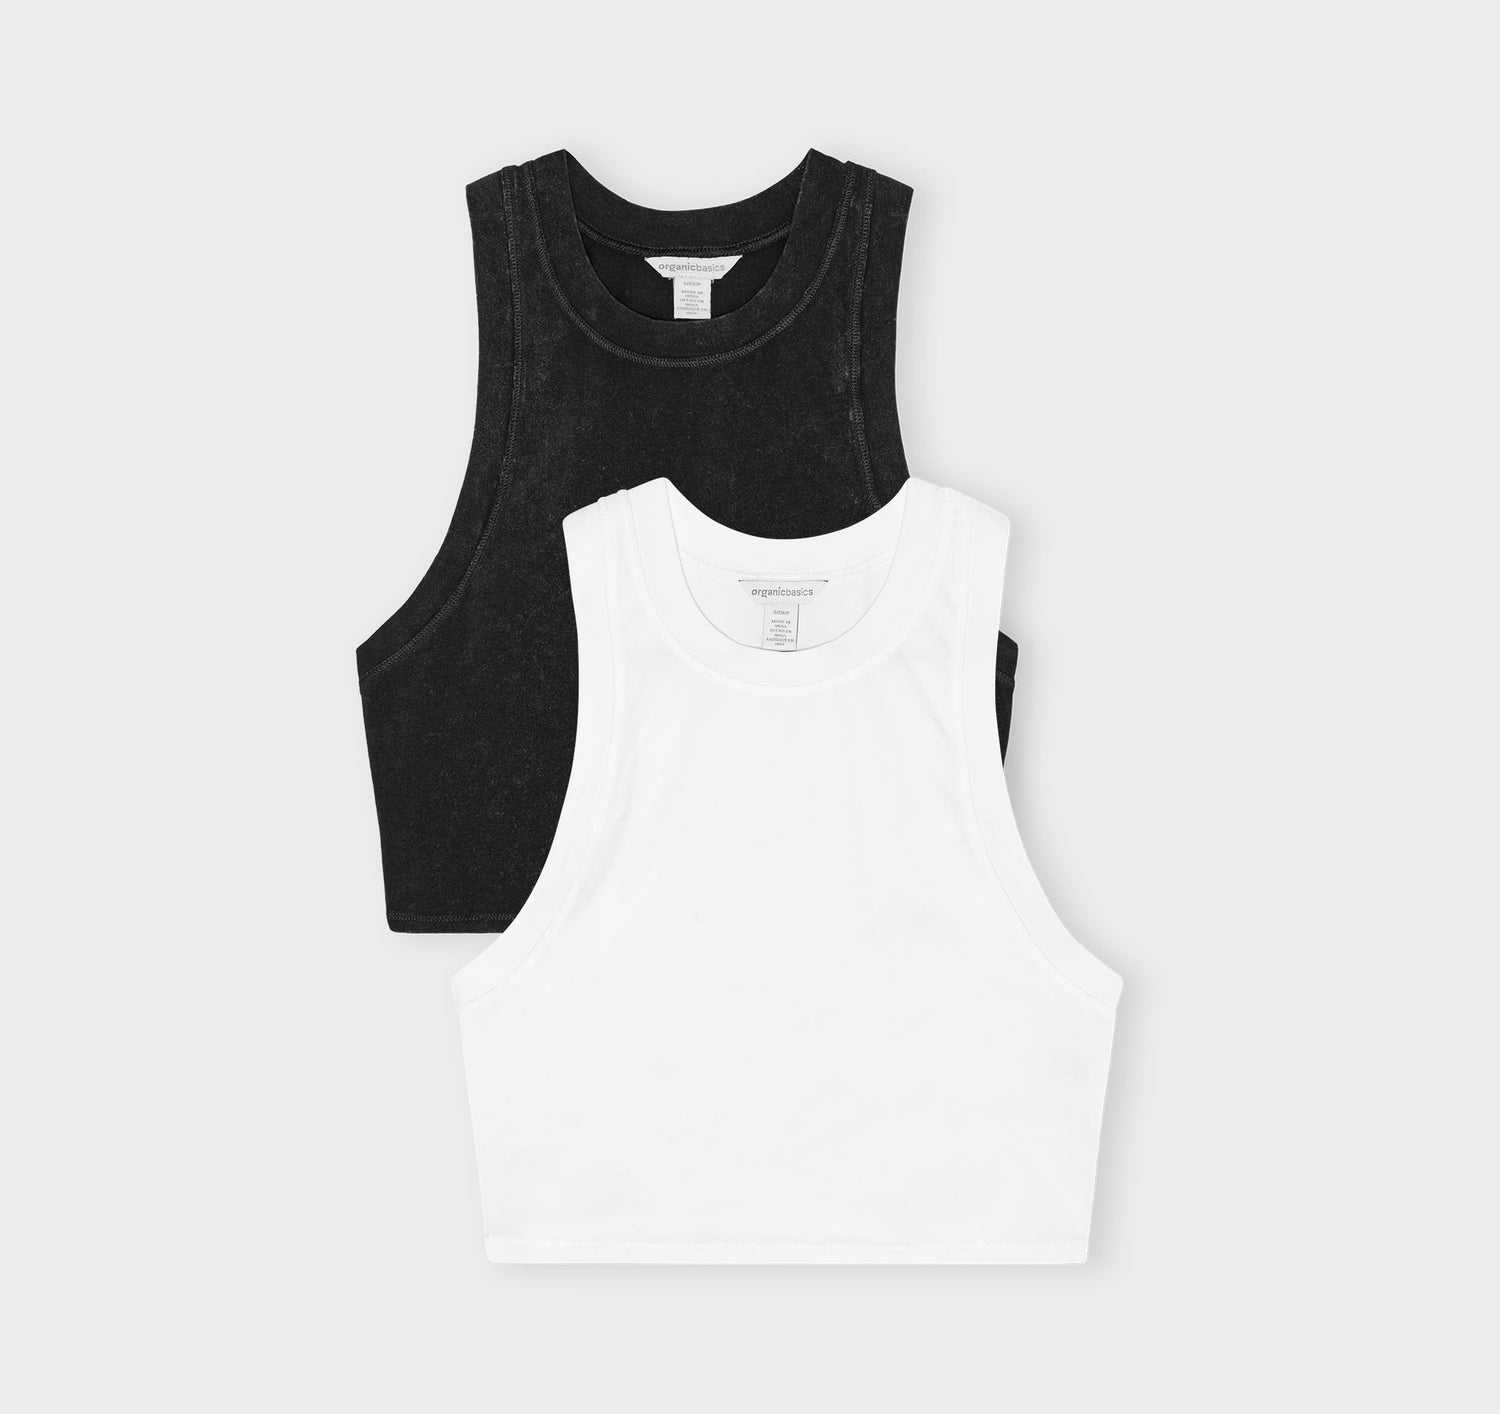 Cropped tank tops